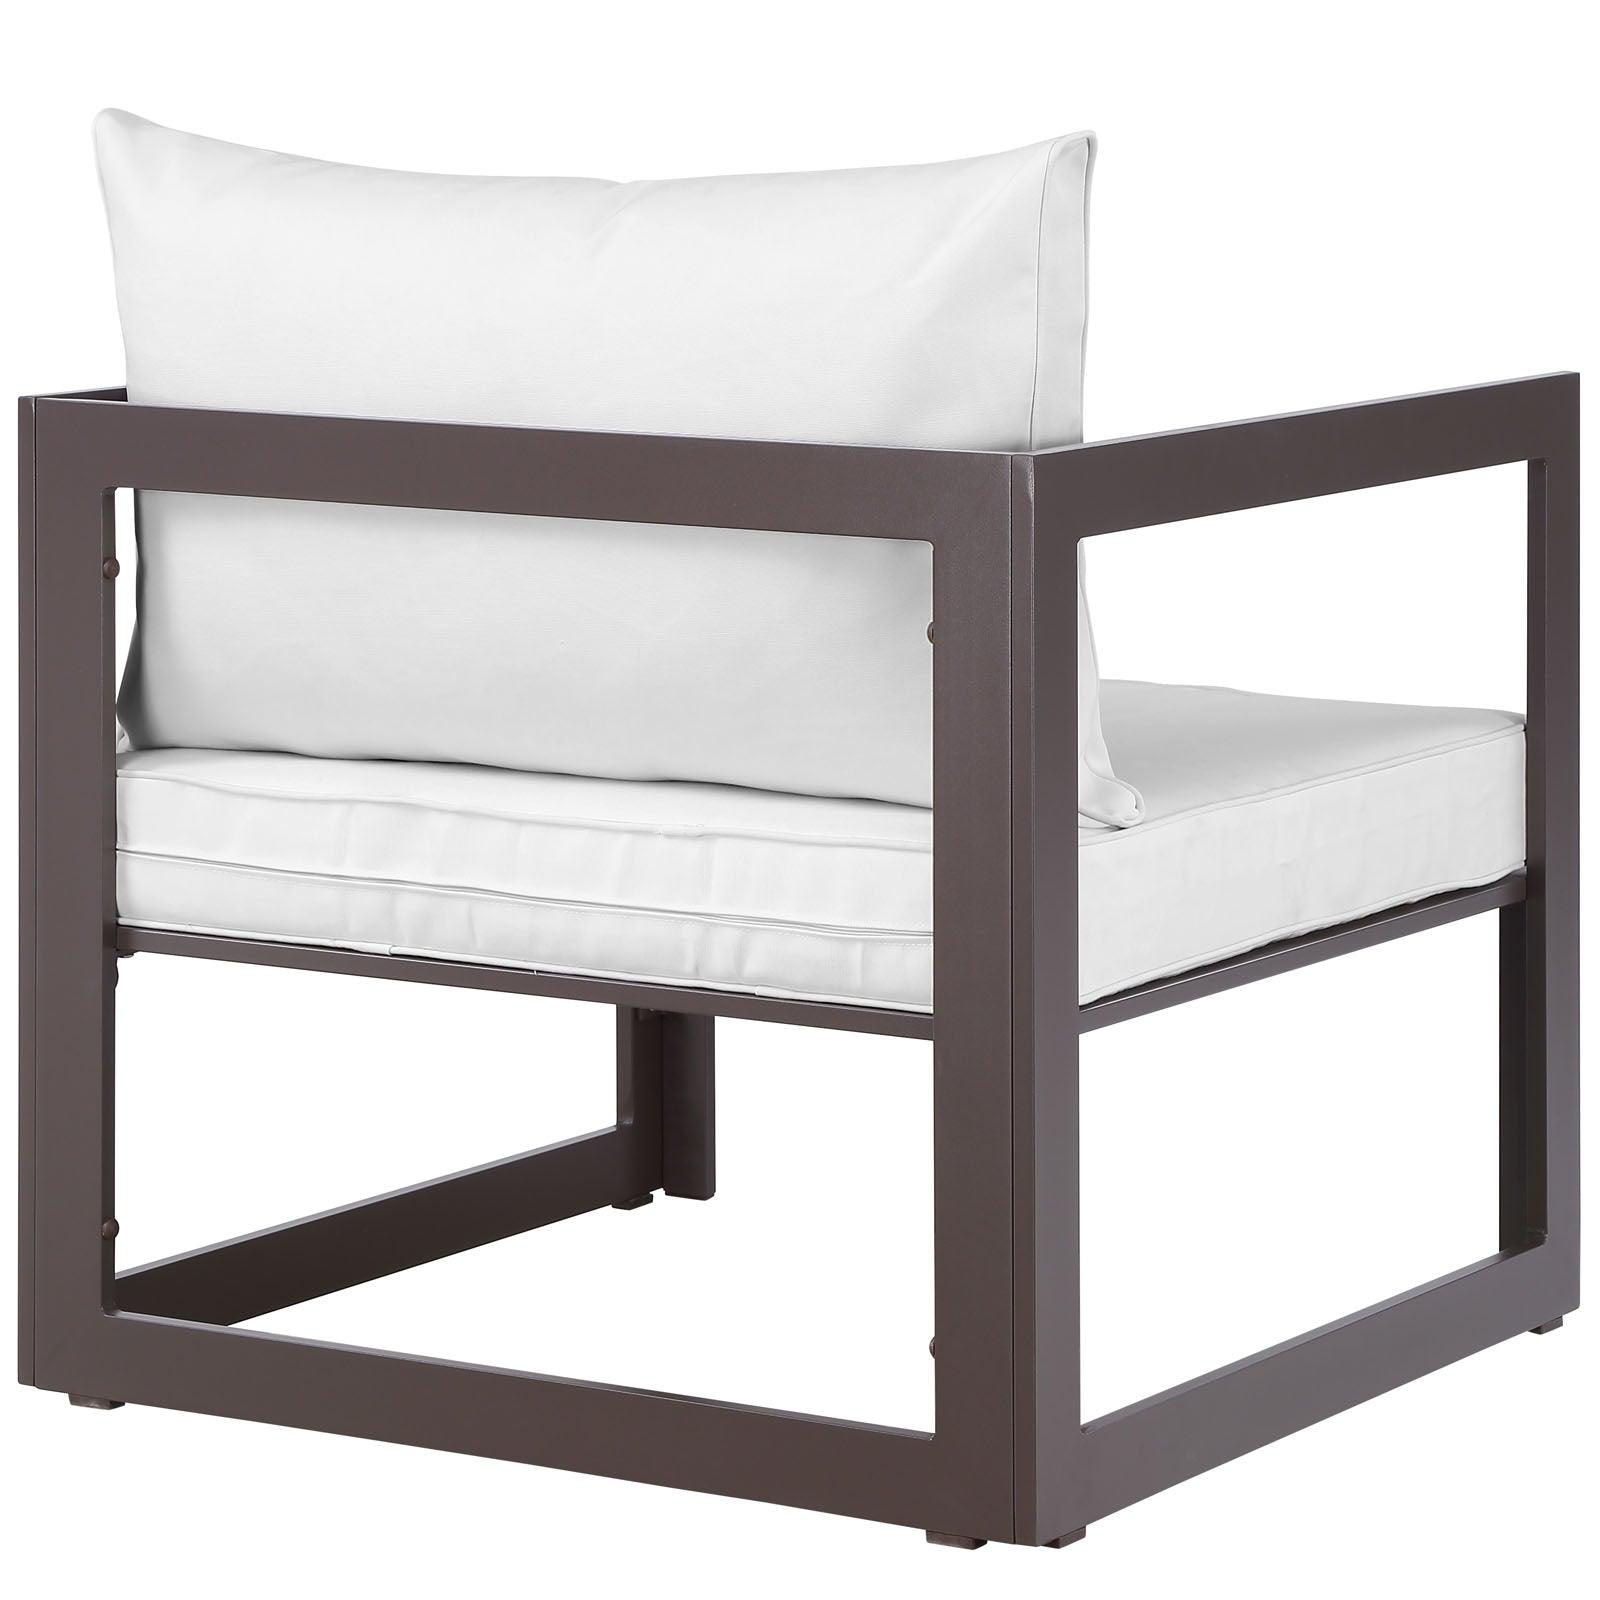 Modway Fortuna Outdoor Patio Armchair FredCo